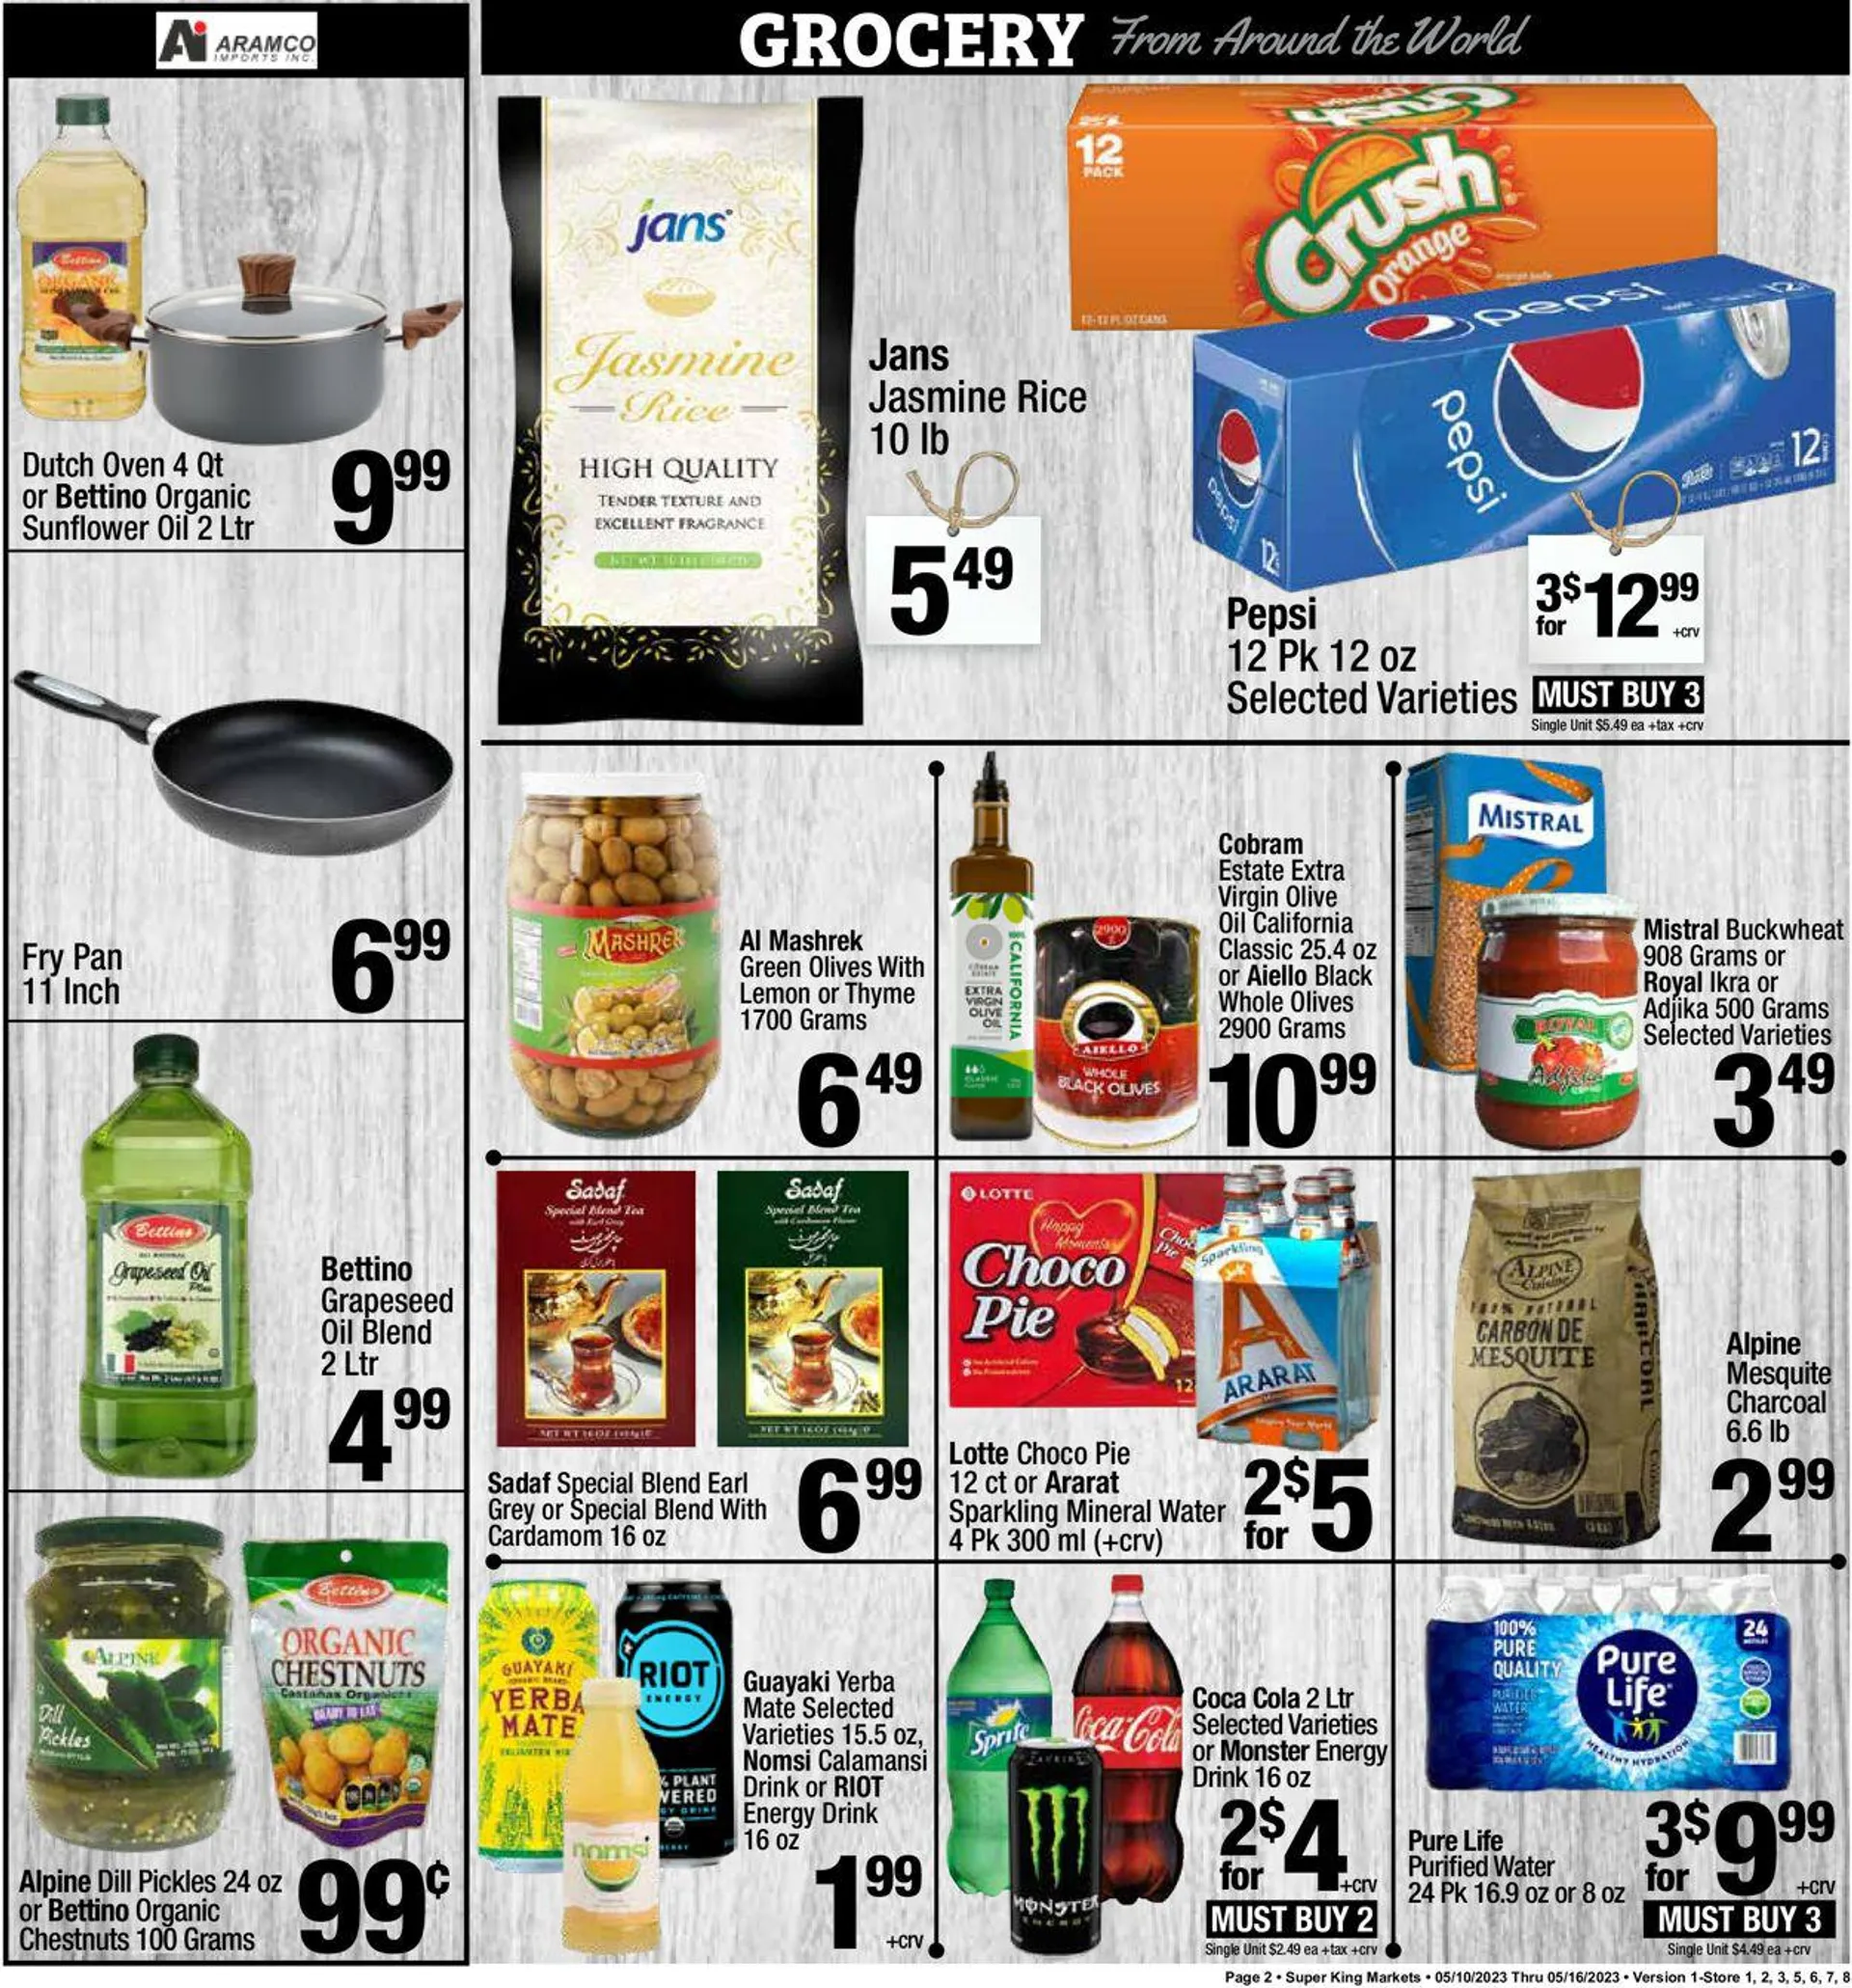 Super King Market Current weekly ad - 2